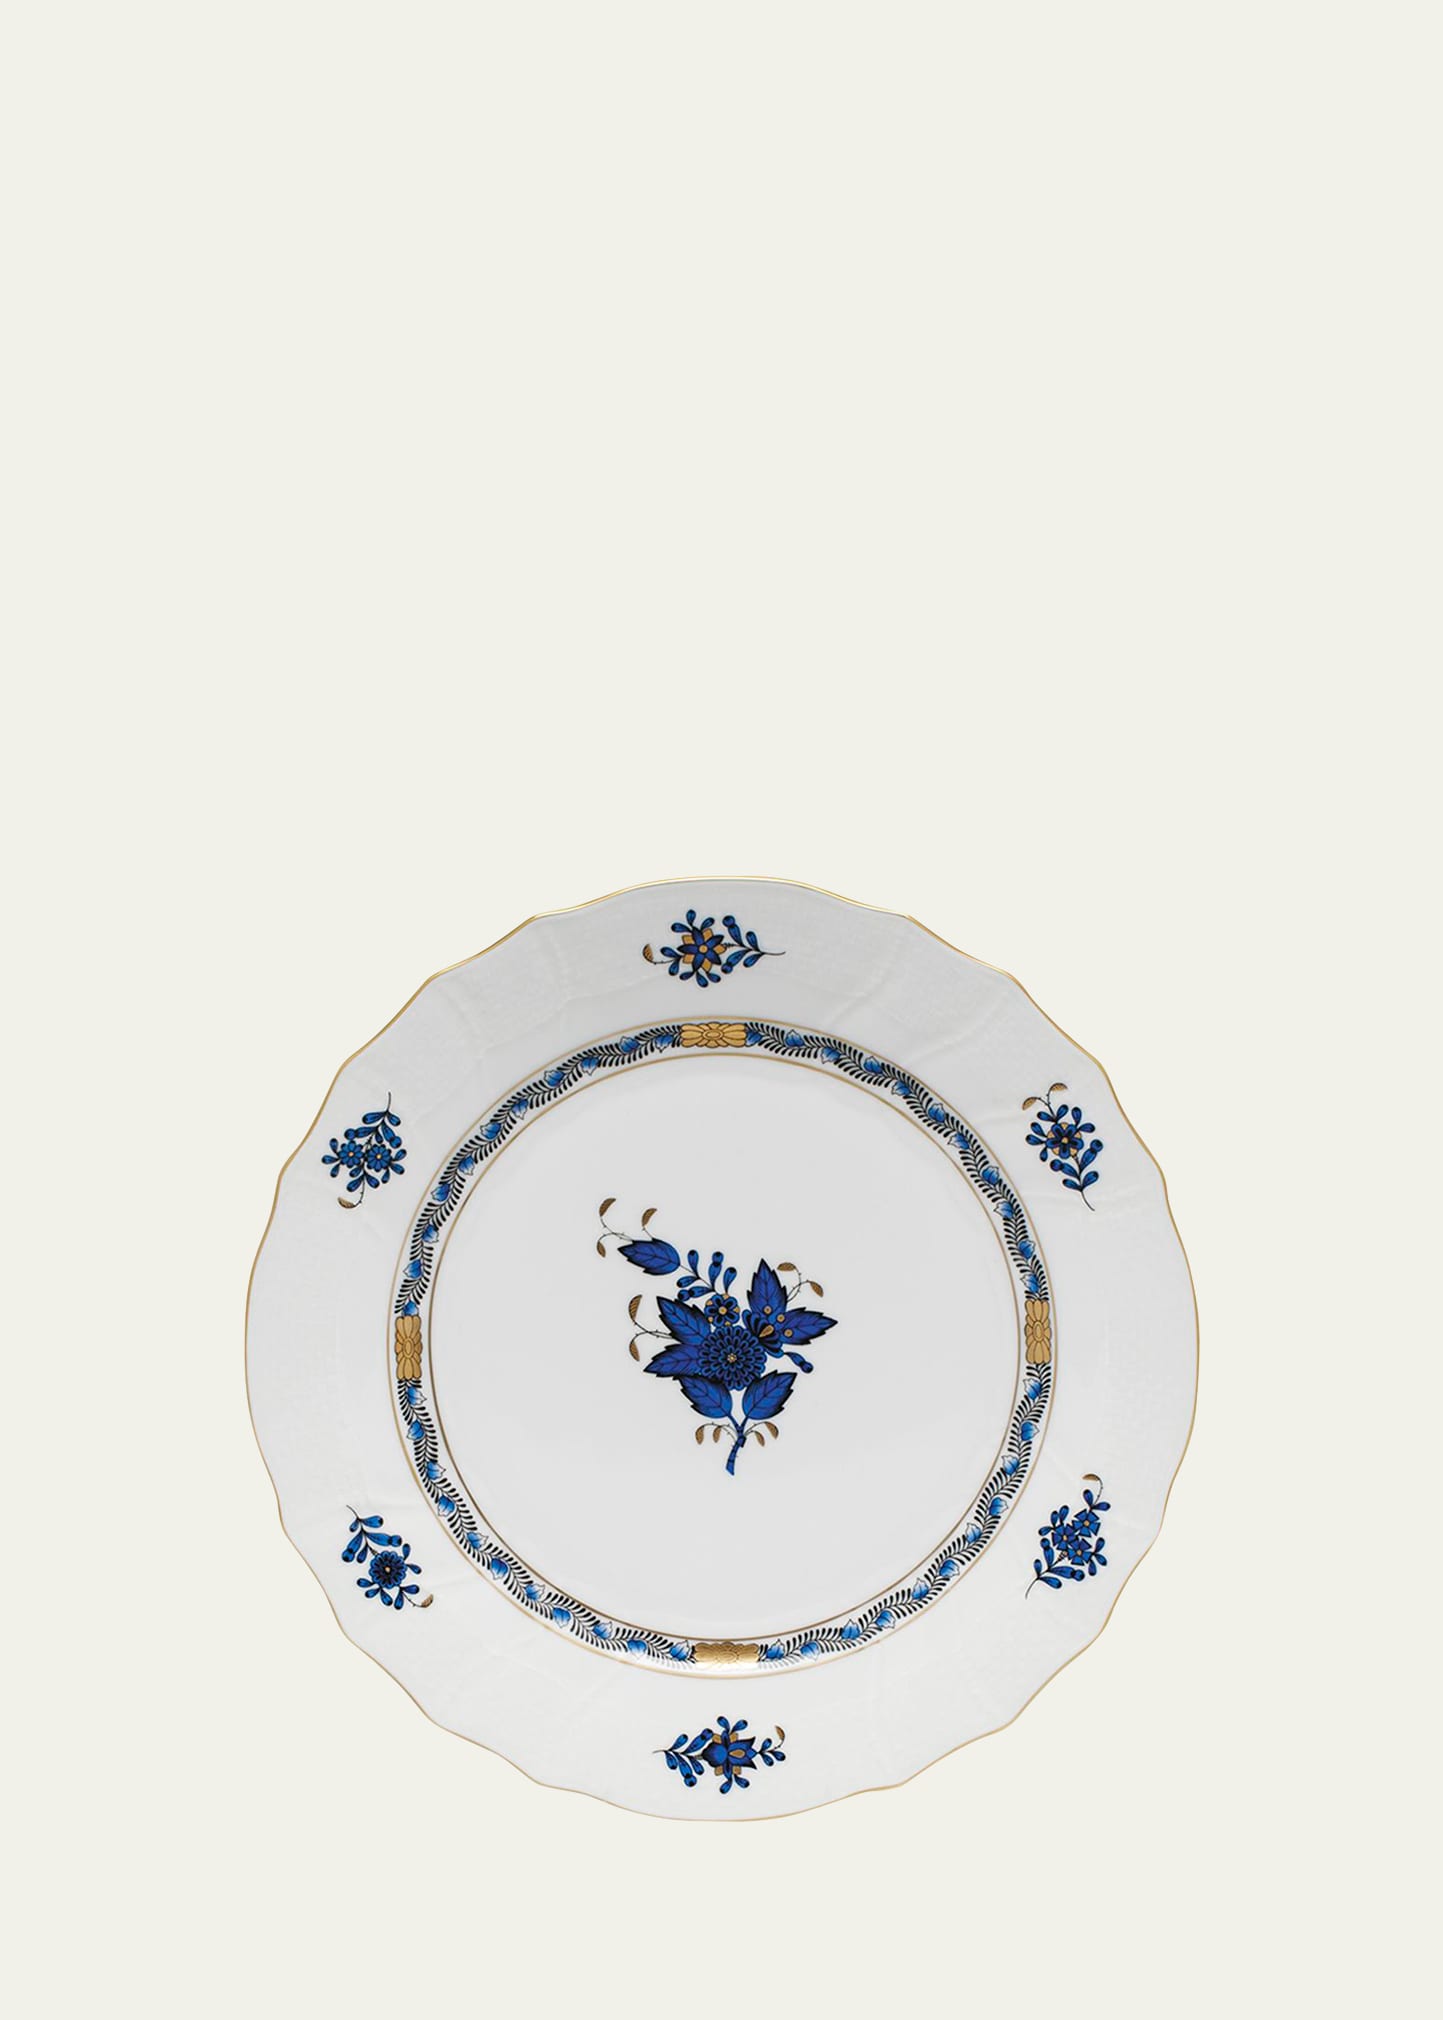 Chinese Bouquet Black Sapphire Dinner Plate